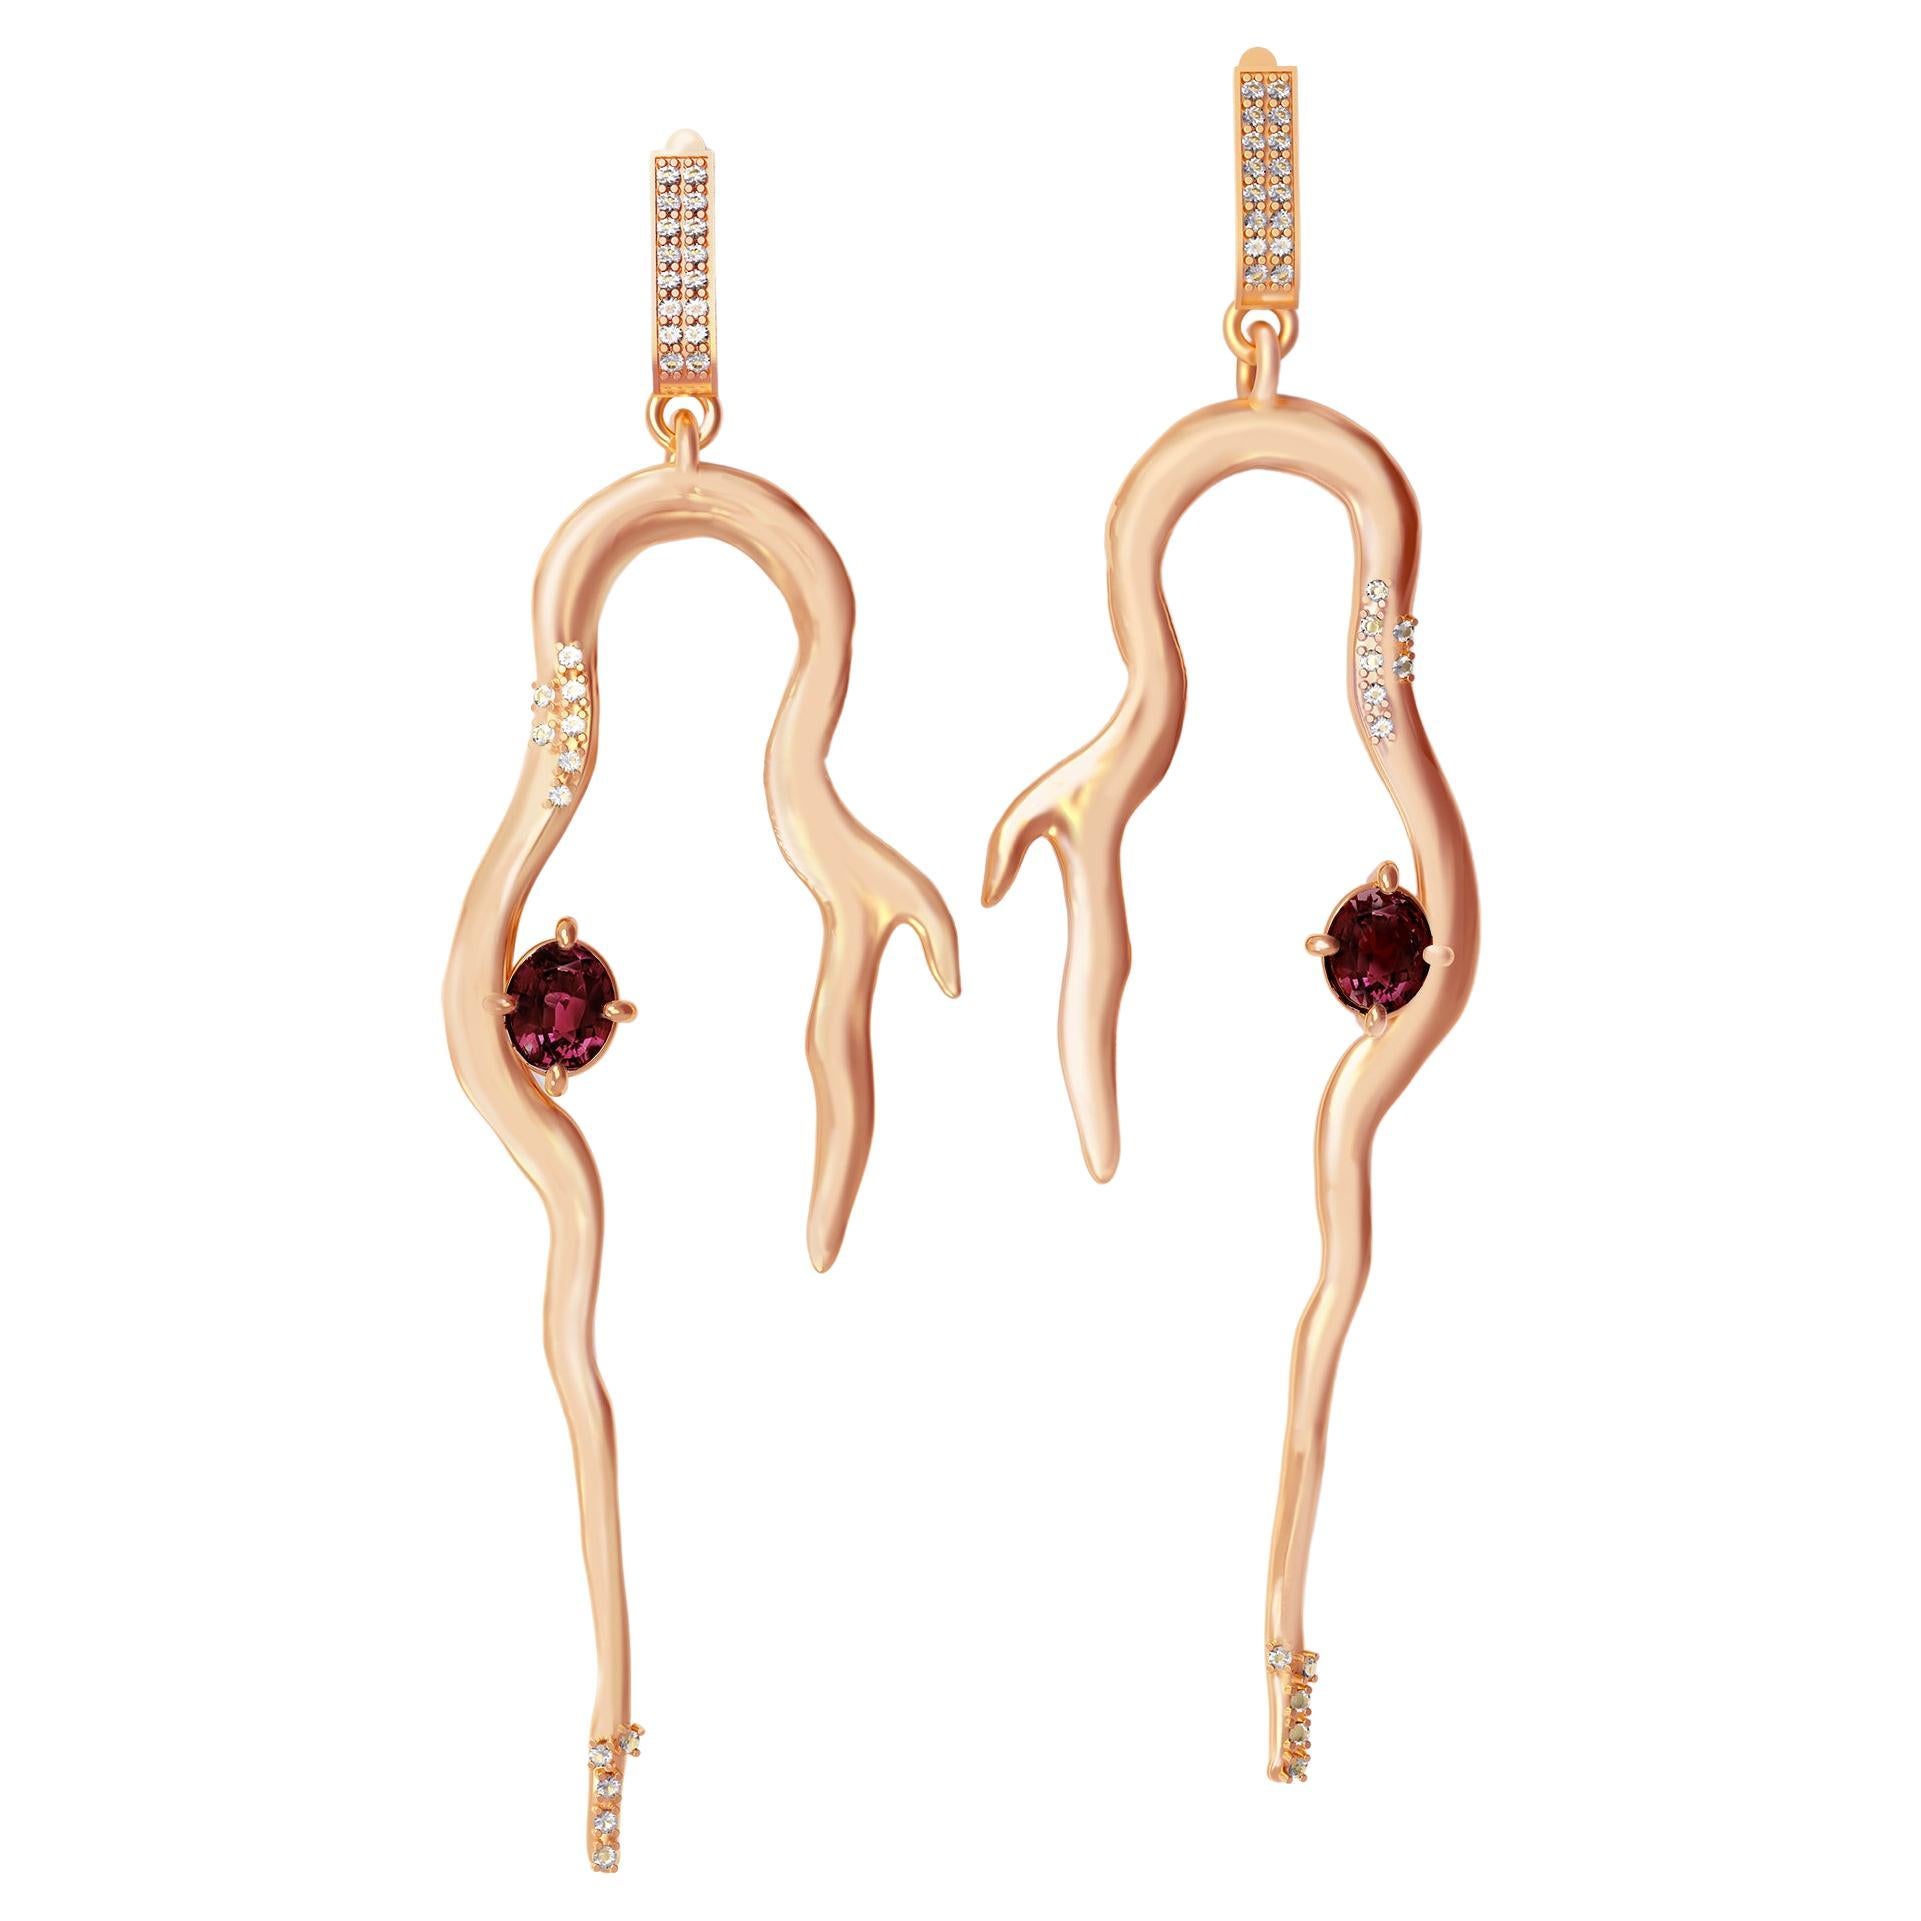 Eighteen Karat Rose Gold Contemporary Earrings with Sapphire and Diamonds